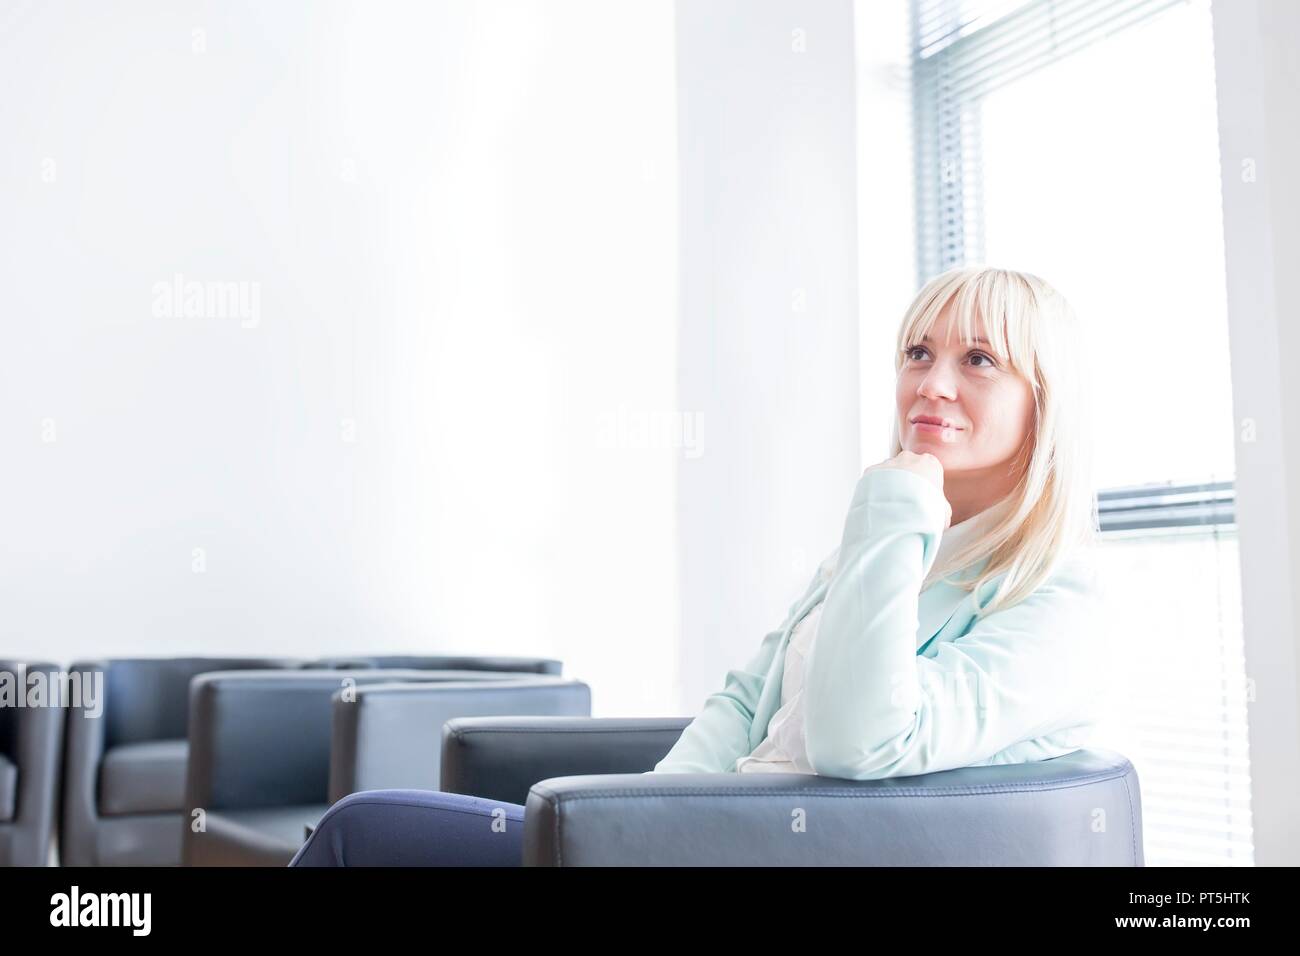 Pensive mid adult woman sitting in doctor's waiting room with hand on chin. Stock Photo